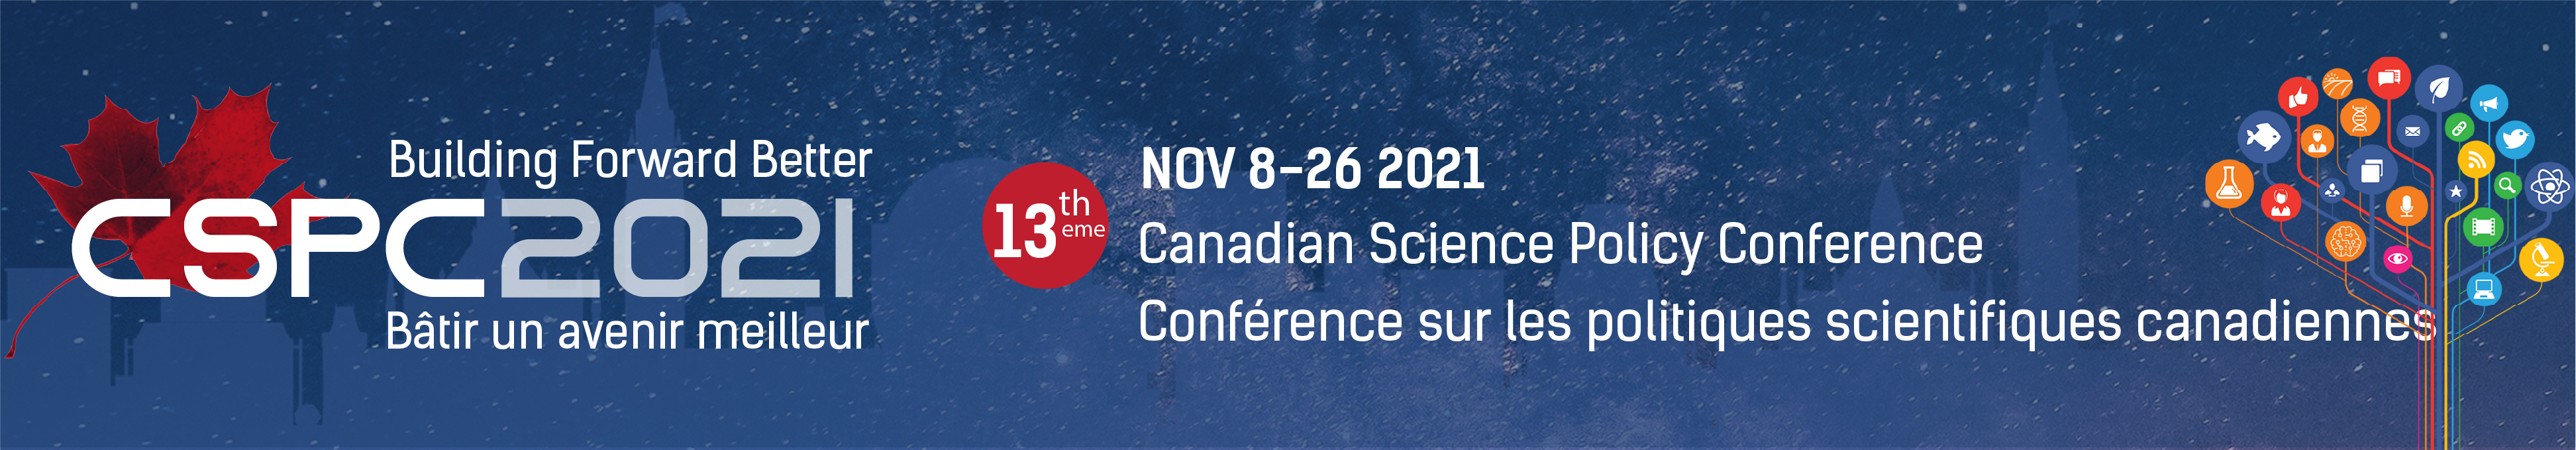 Banner for the CSPC 2021 conference with a starry night background and the works "Building Forward Better - 13th Canadian Science Policy Conference'